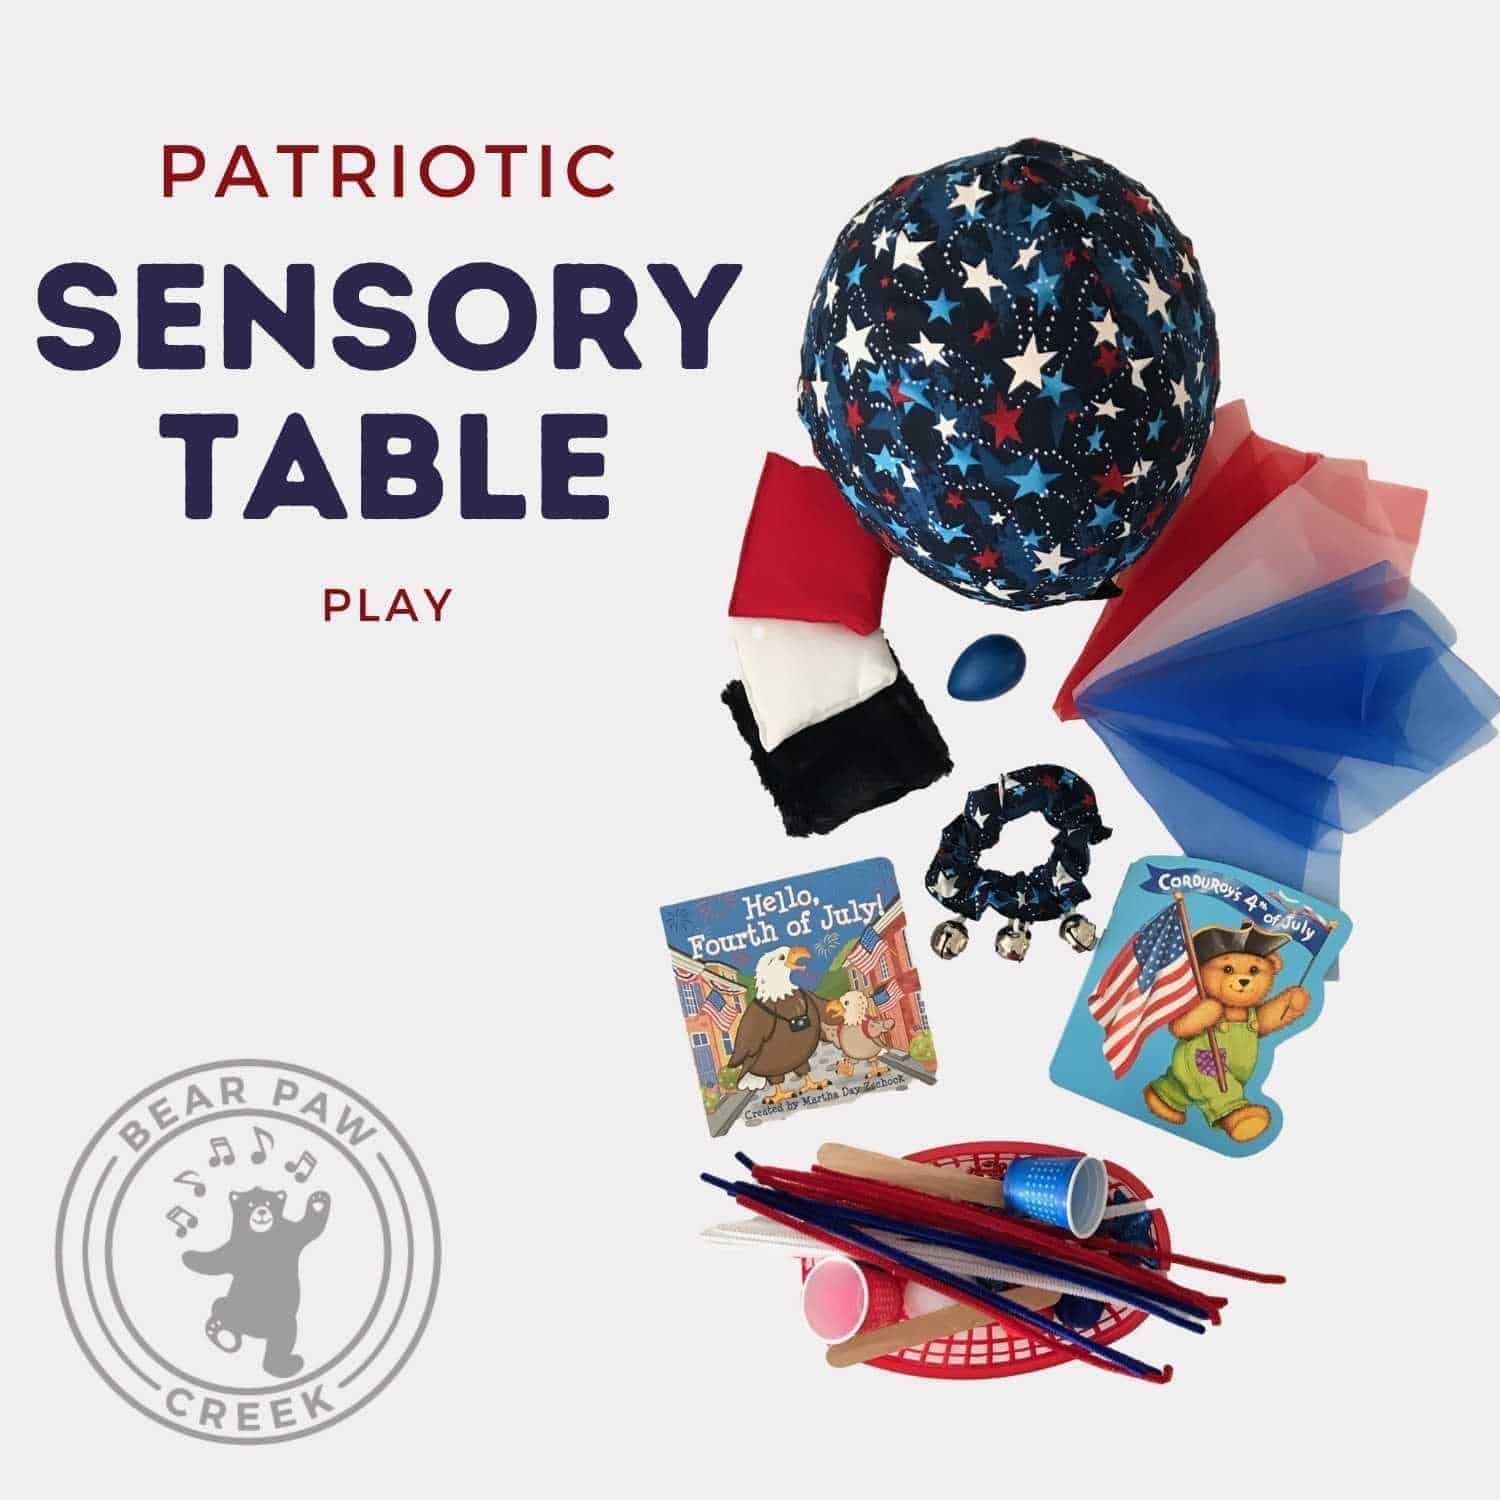 Patriotic Sensory Table Play For Toddlers and Preschool Listening Lessons